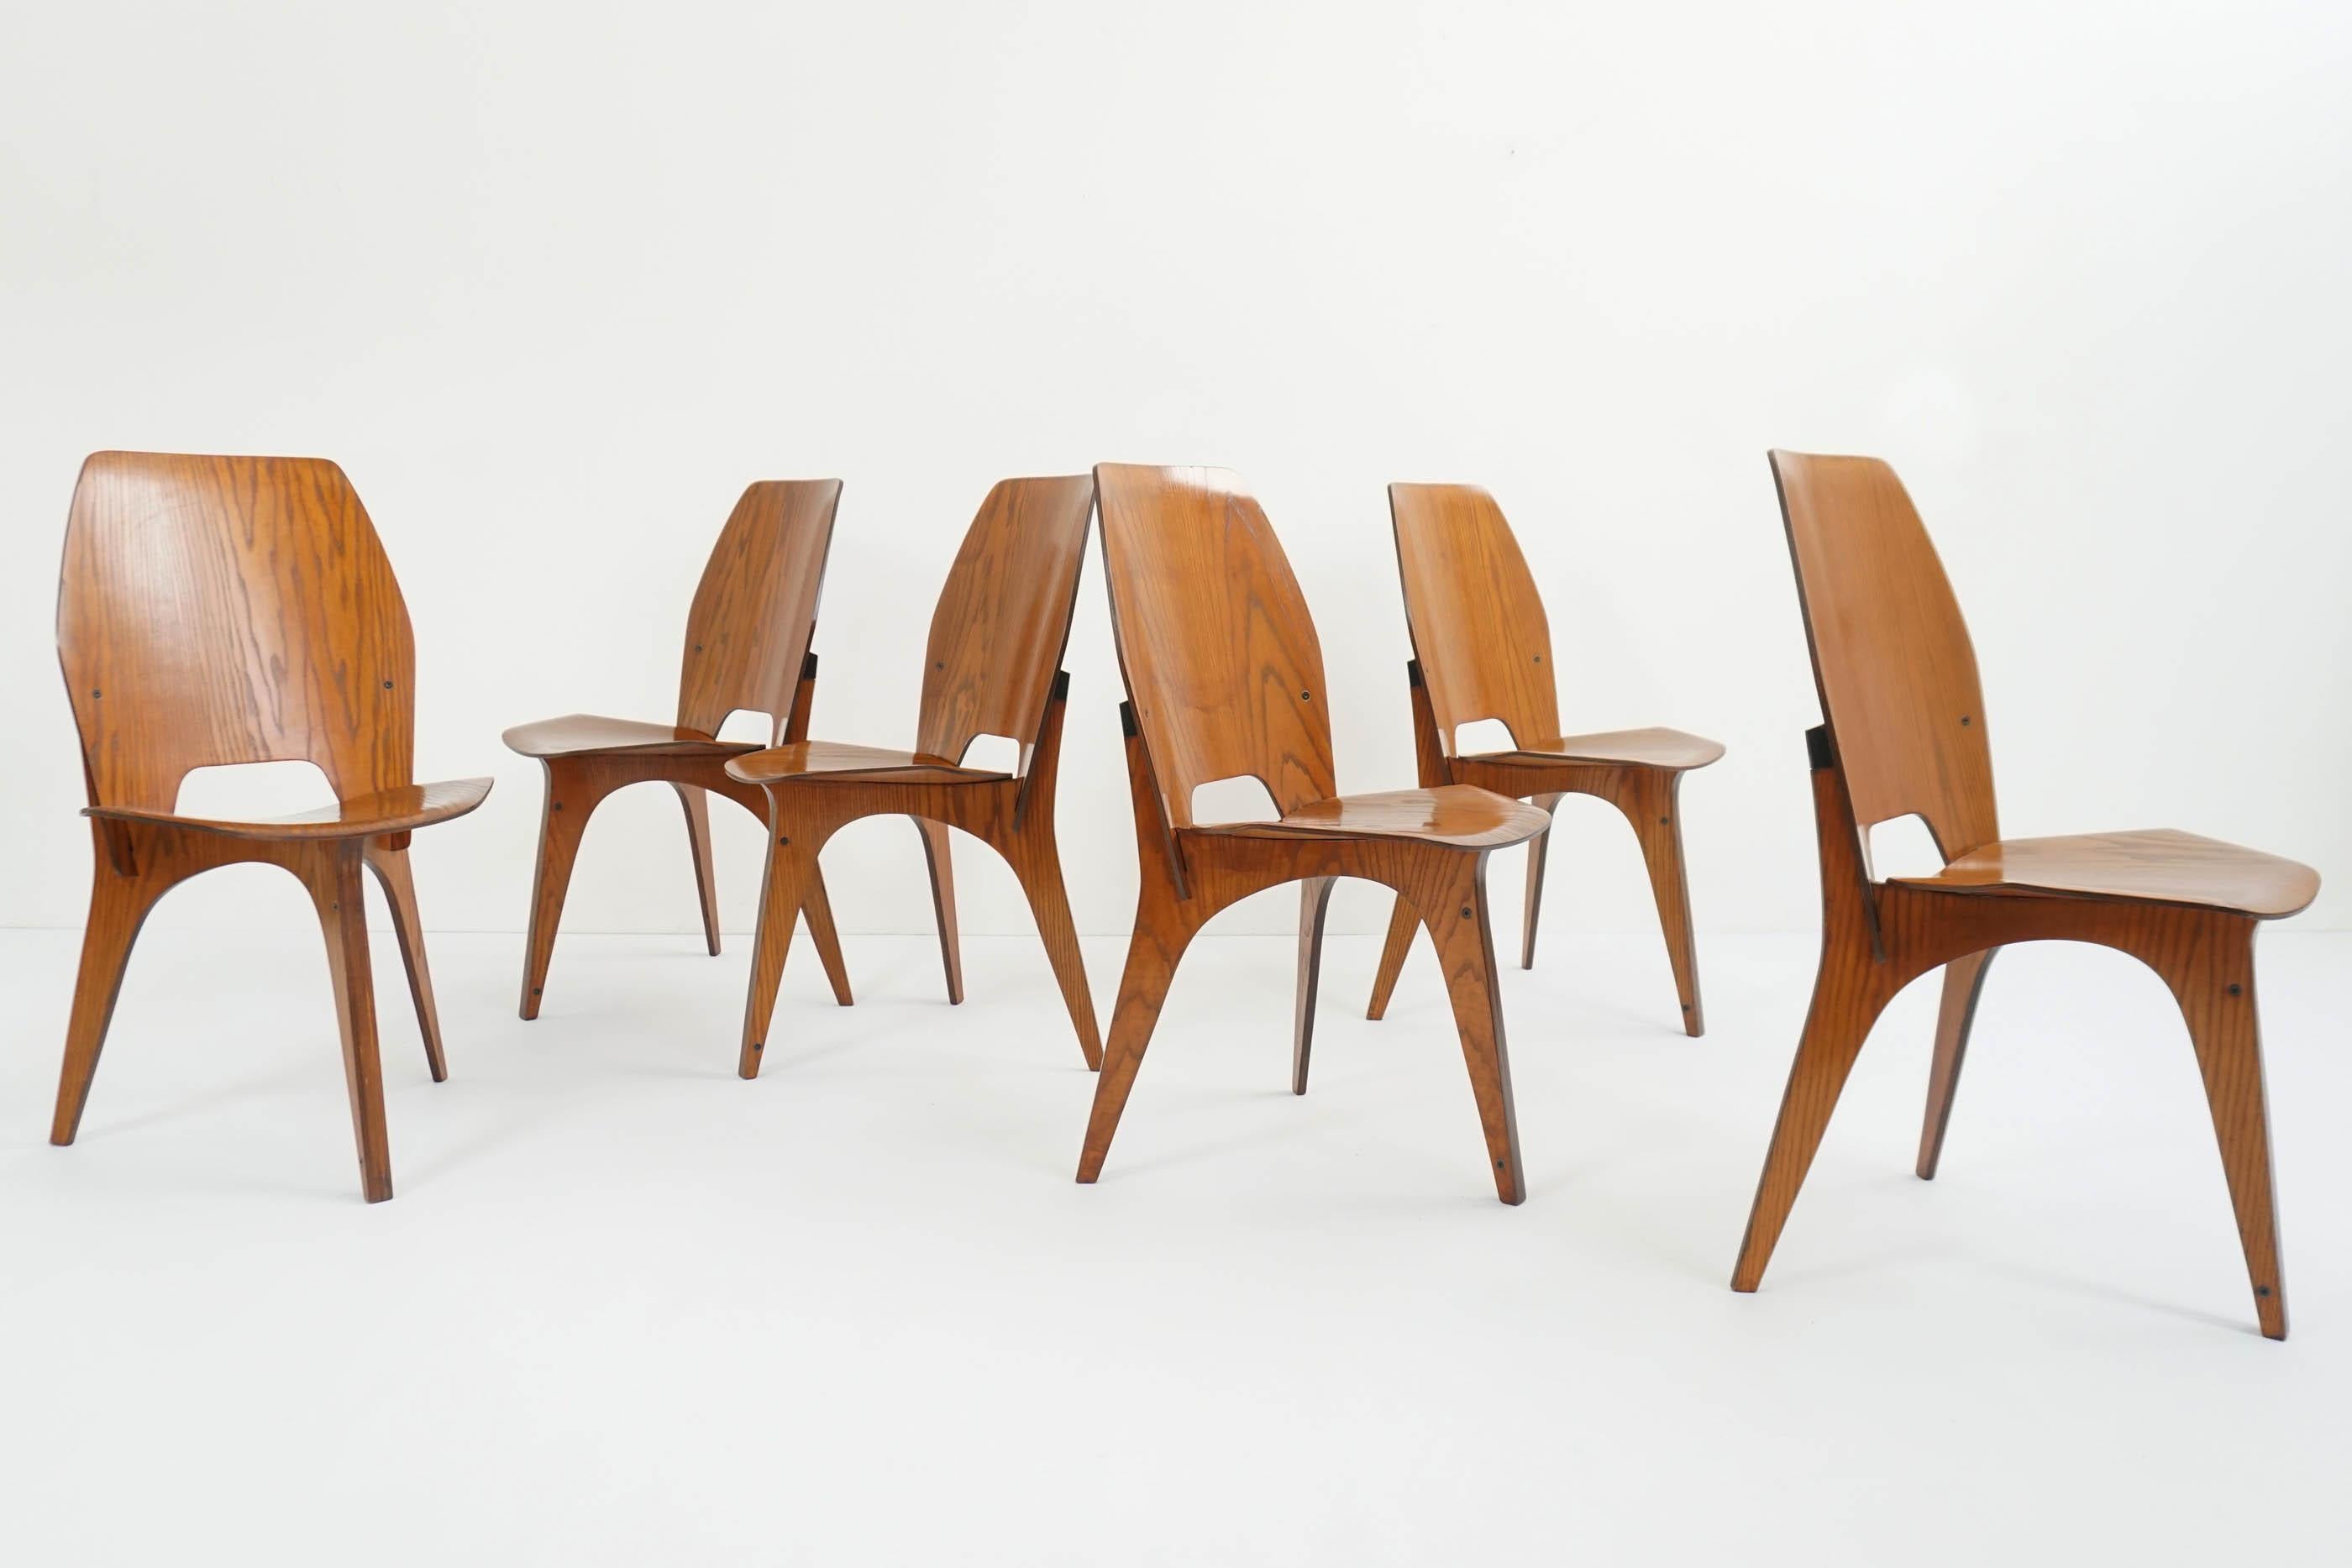 Eugenio Gerli for Tecno, Italy 1959 Iconic and Rare Set of 6 Teak Plywood Chairs For Sale 7